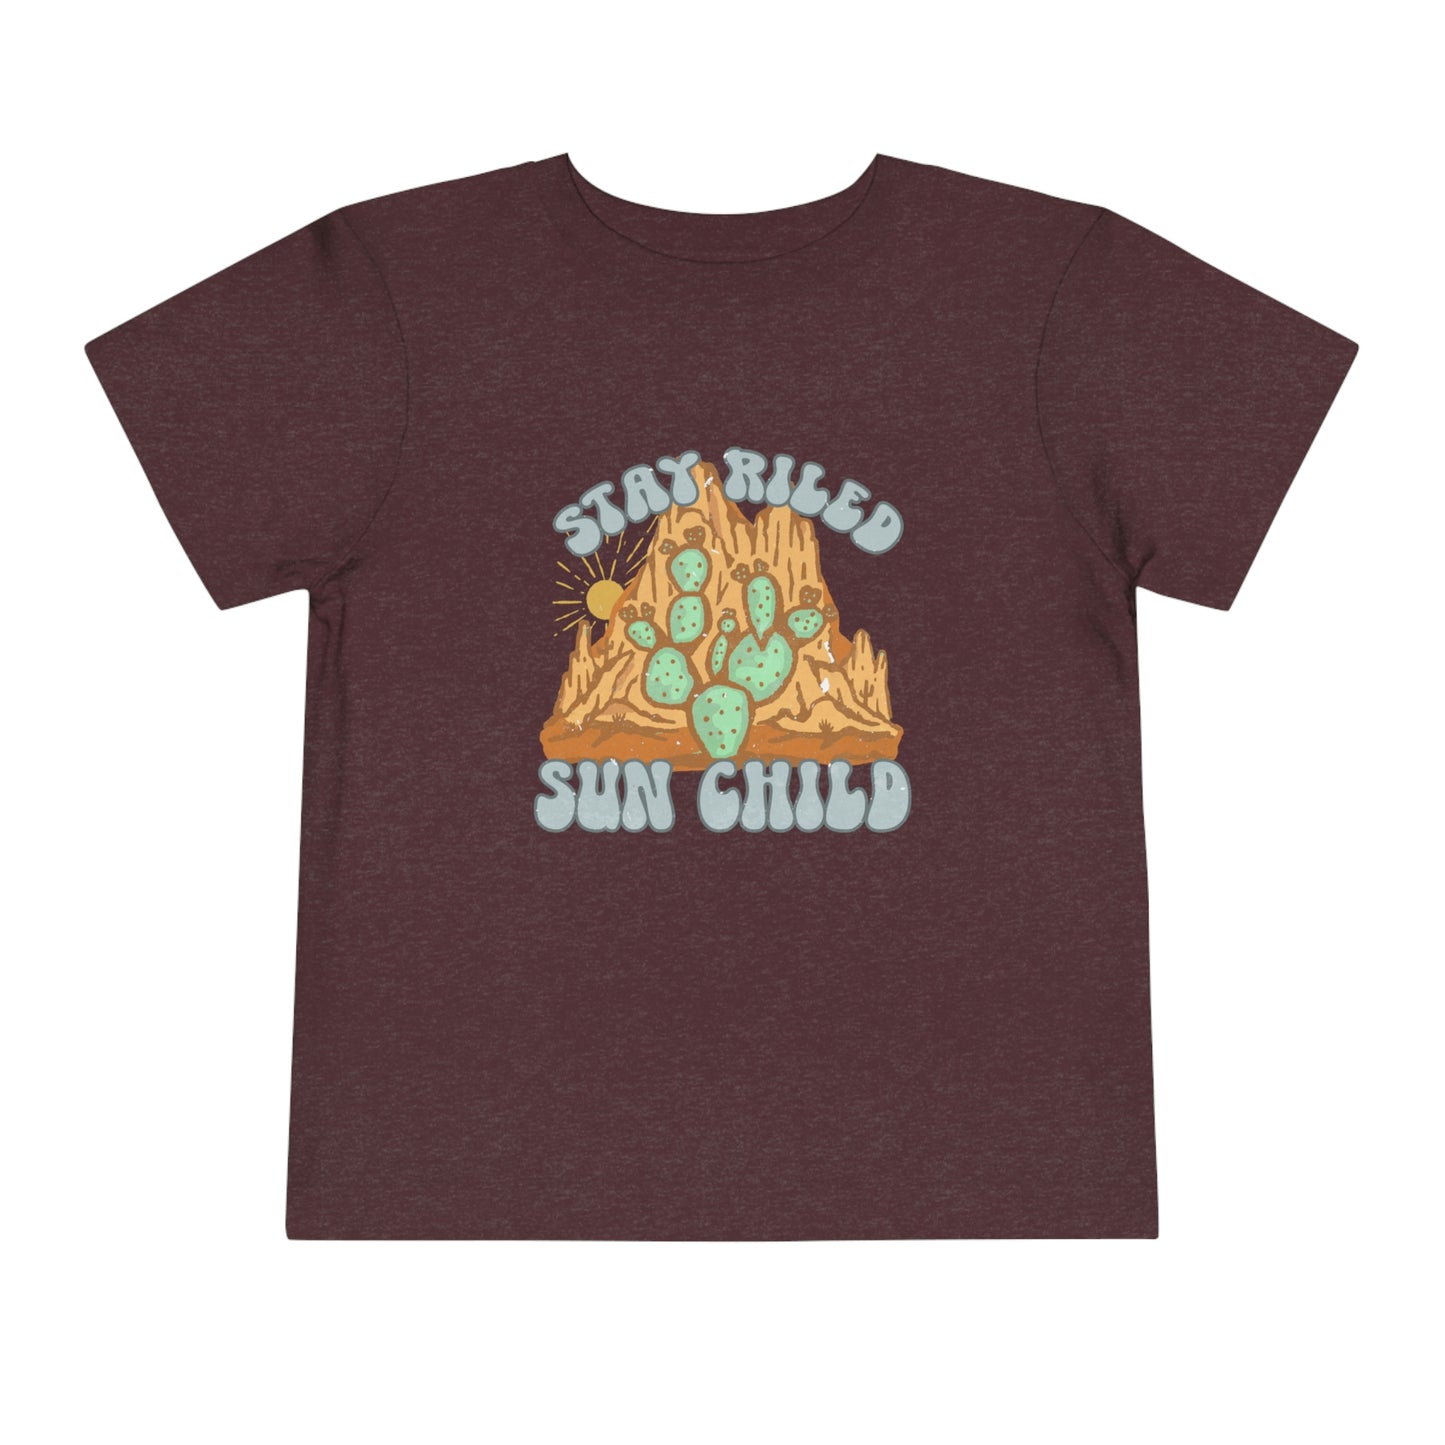 "Stay Riled Wild Child" Toddler Short Sleeve Tee (2T-5T)